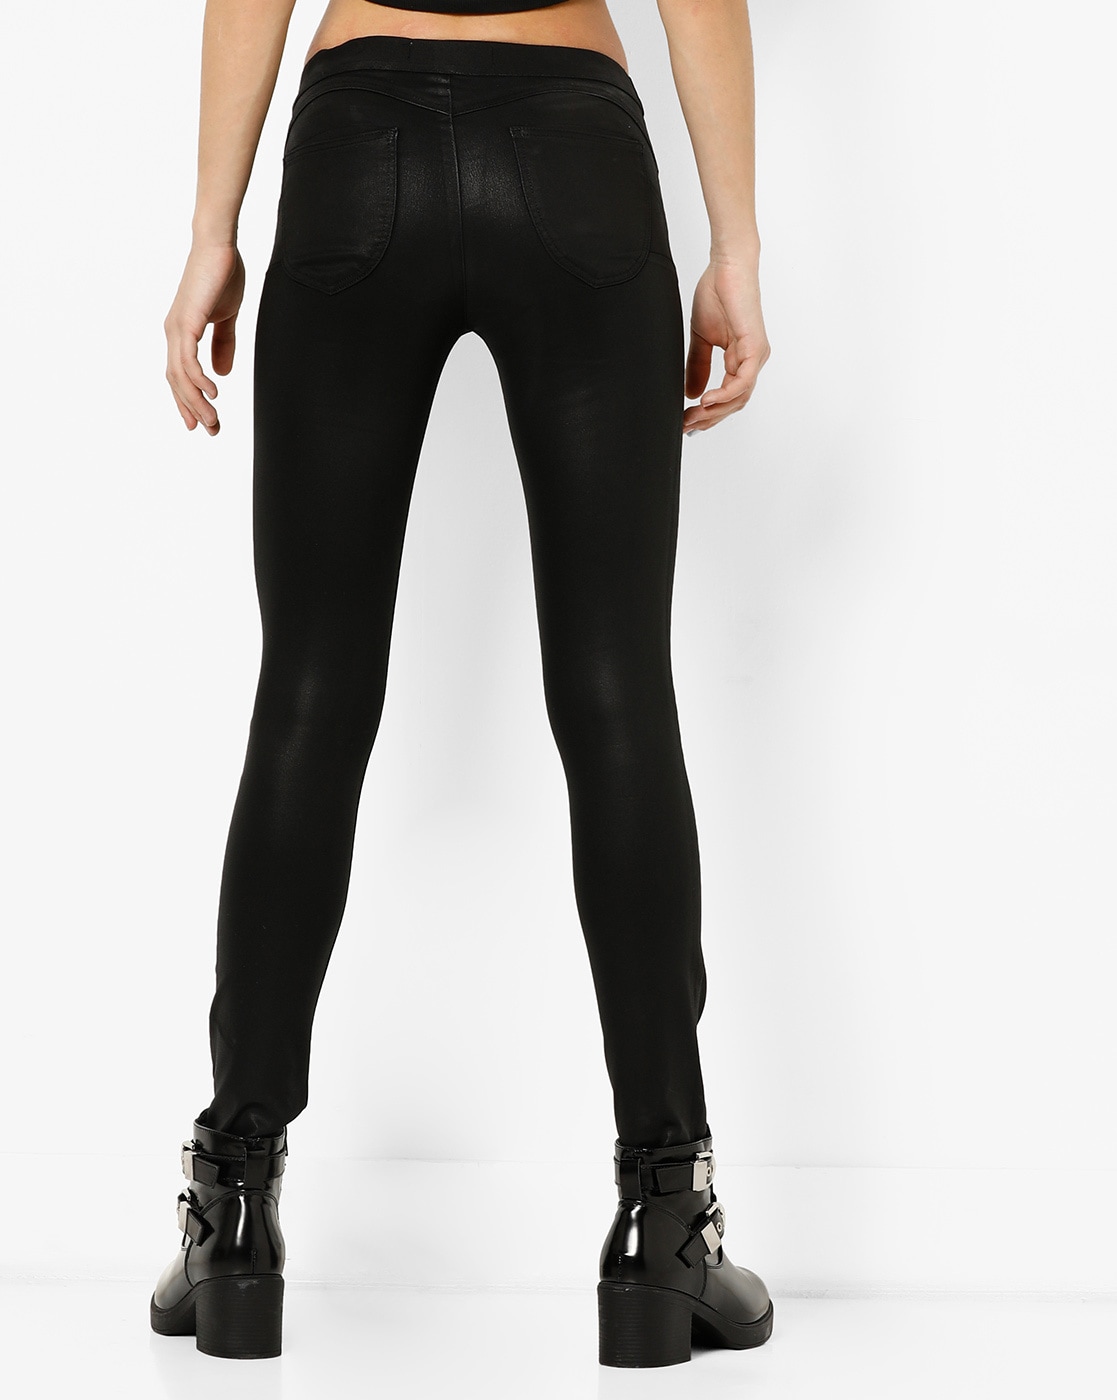 Buy Black Glossy Faux Leather Stretchable Pant  Jeans  Pants   LondonragIn  London Rag India